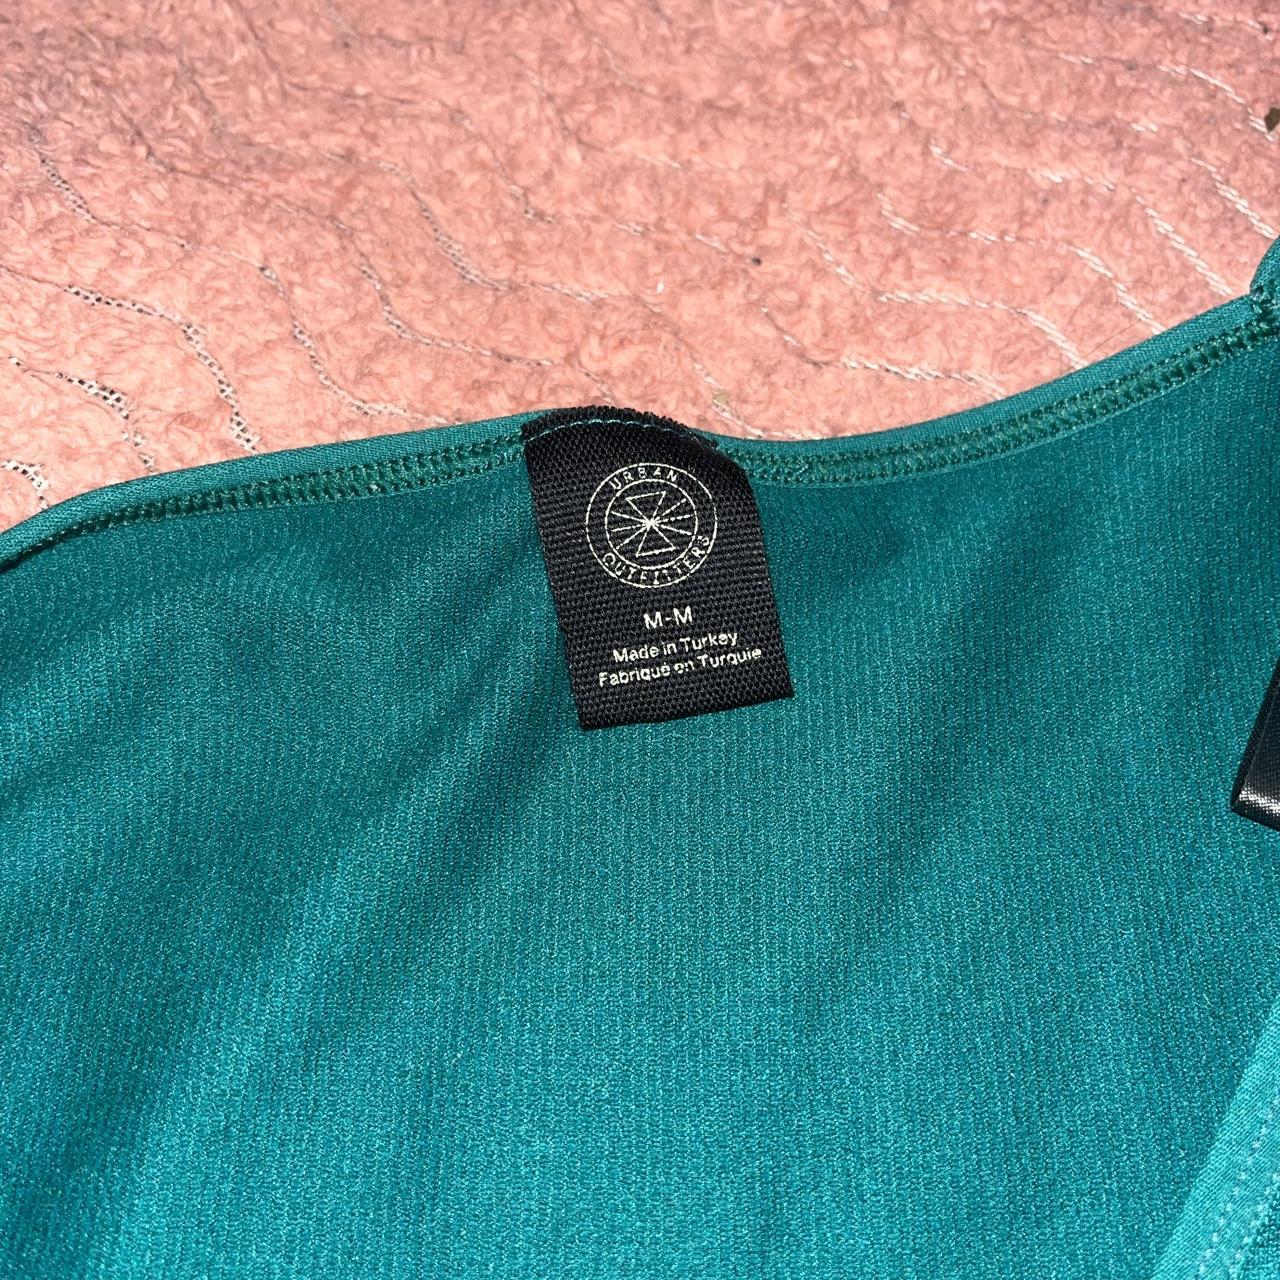 Urban outfitters long sleeve green wrap top - Depop